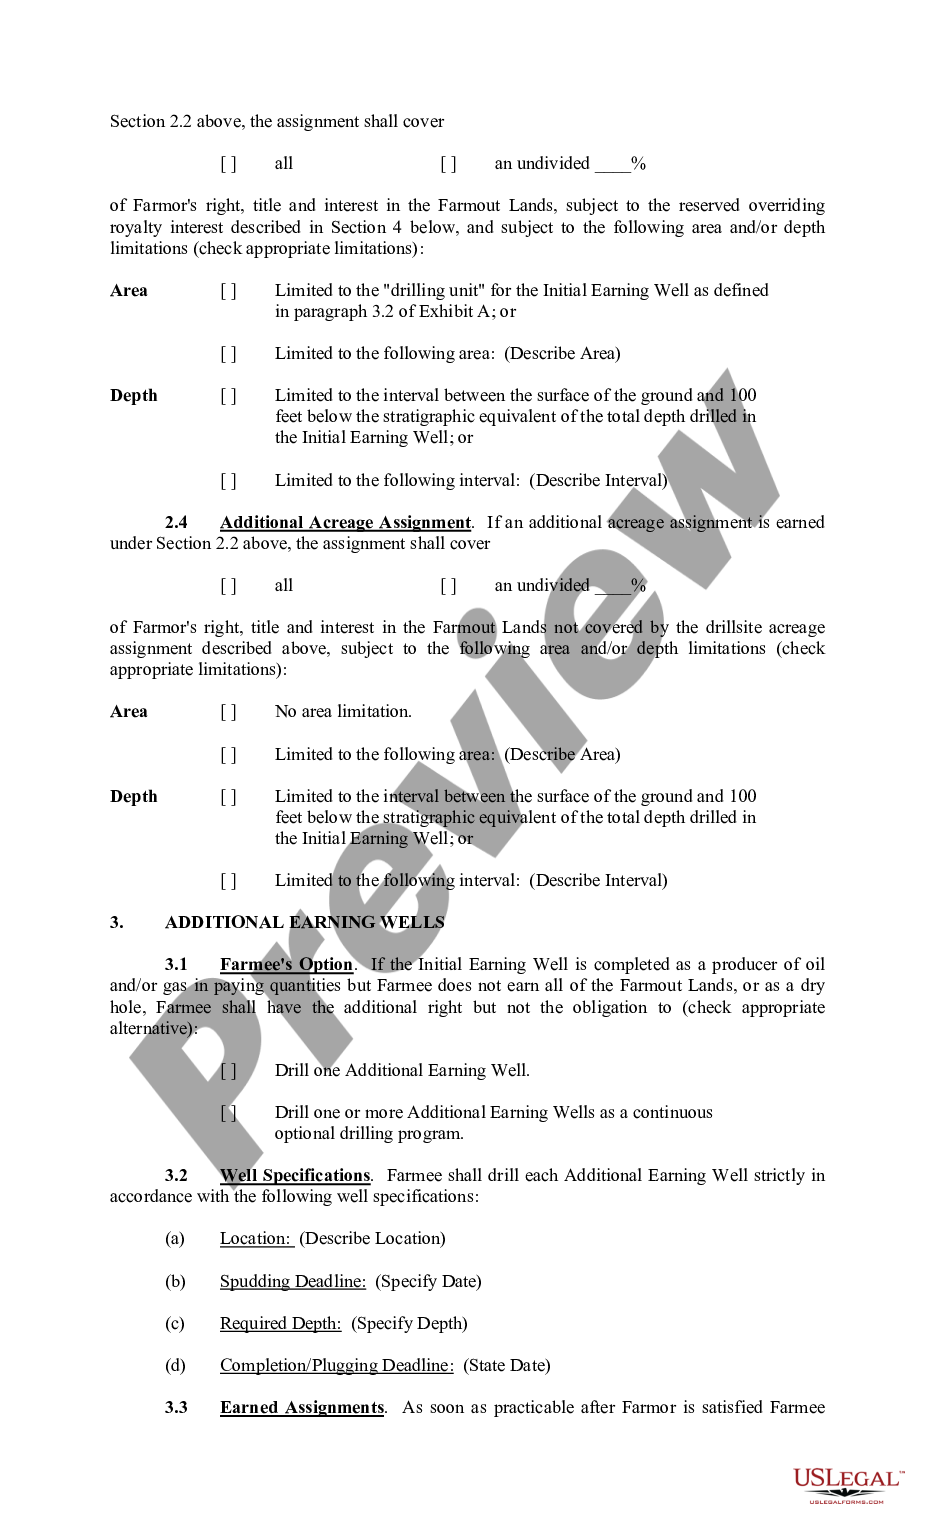 page 1 Farmout Agreement Providing For Multiple Wells with Production Required to Earn An Assignment preview